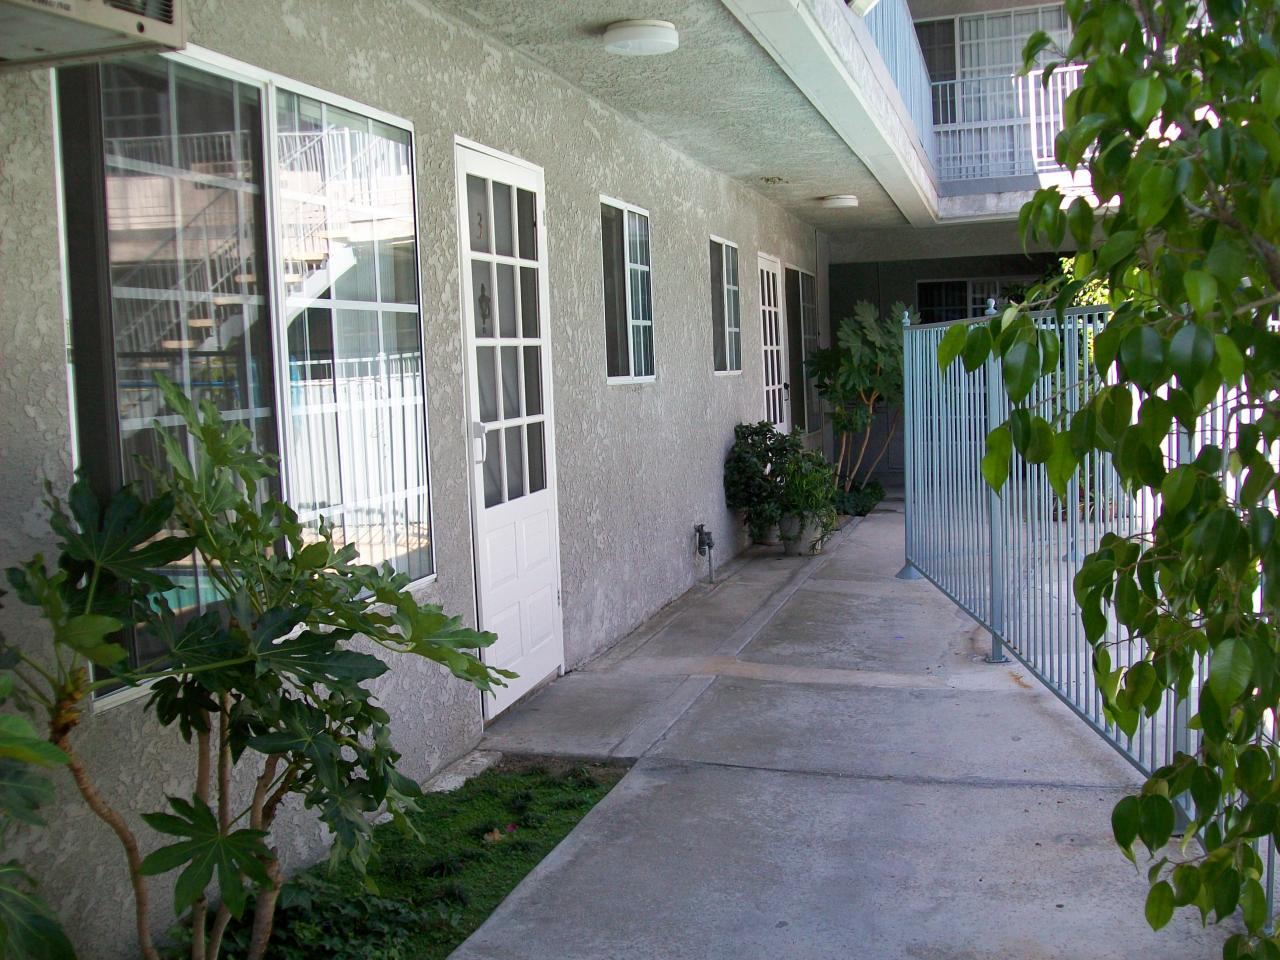 Photo of Kingsbury Villas Apartments - a view of some of the front doors of apartments